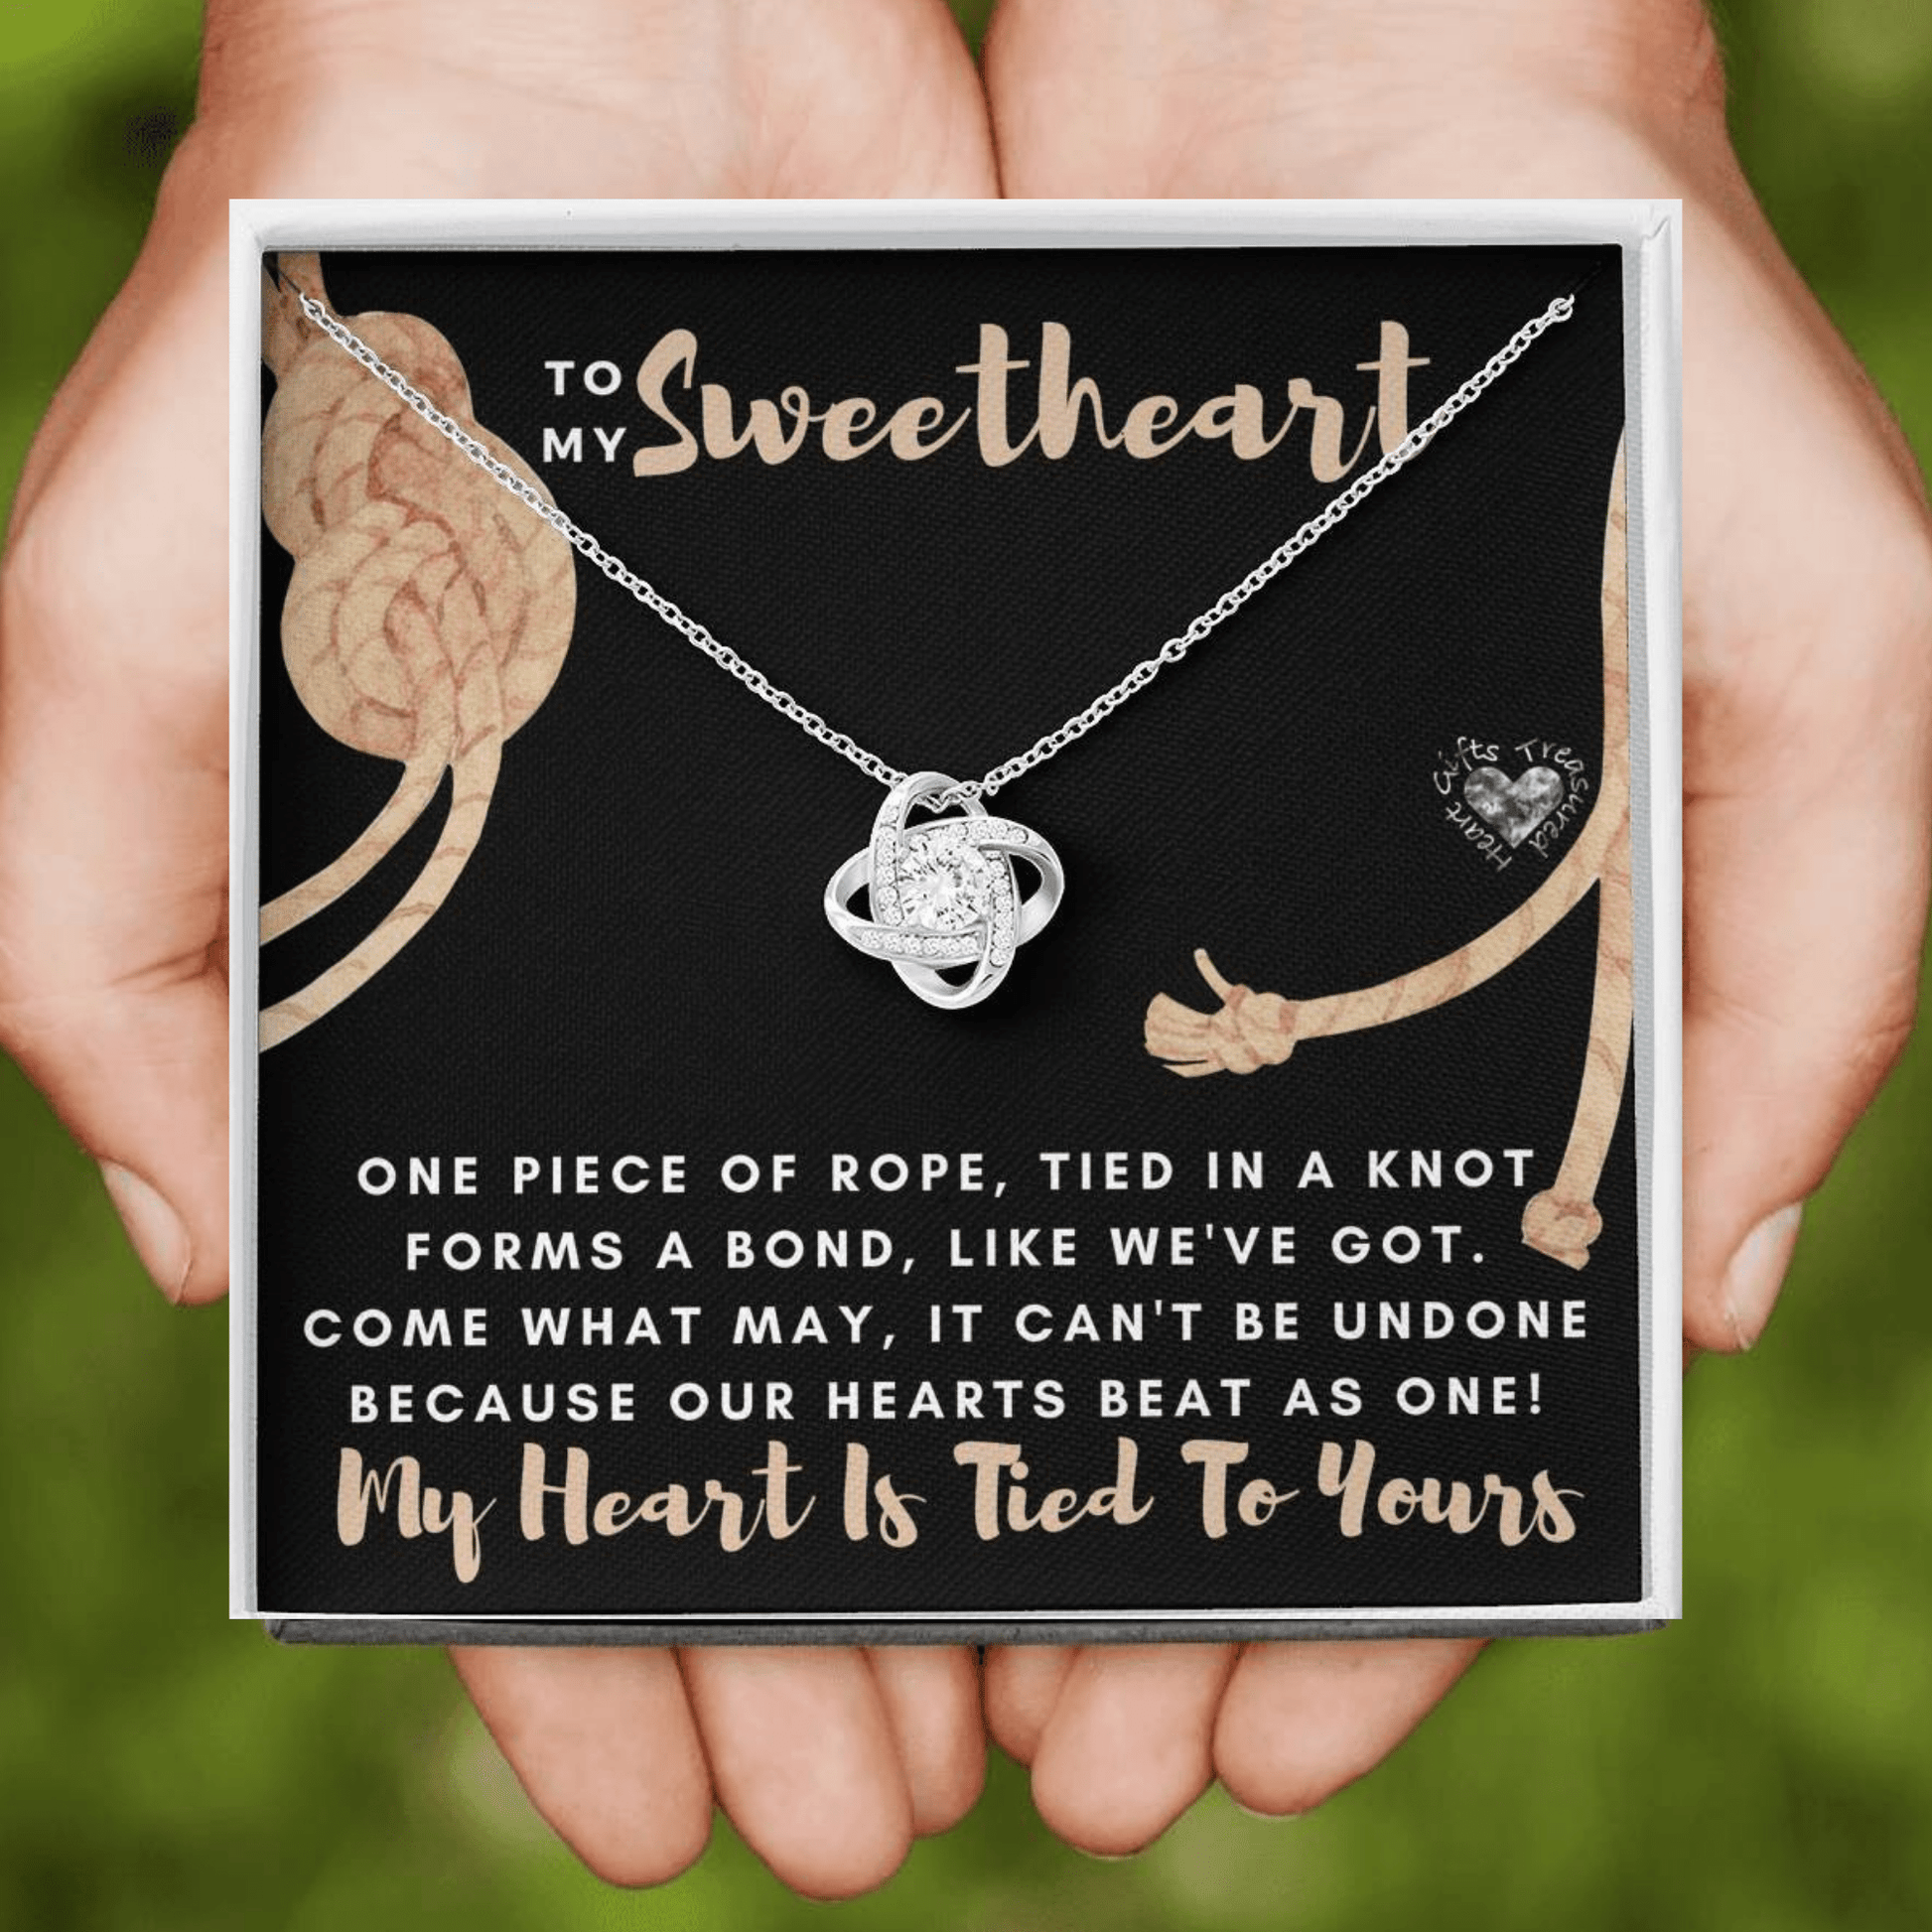 Sweetheart - Our Bond - Love Knot Necklace 100C21 Jewelry 